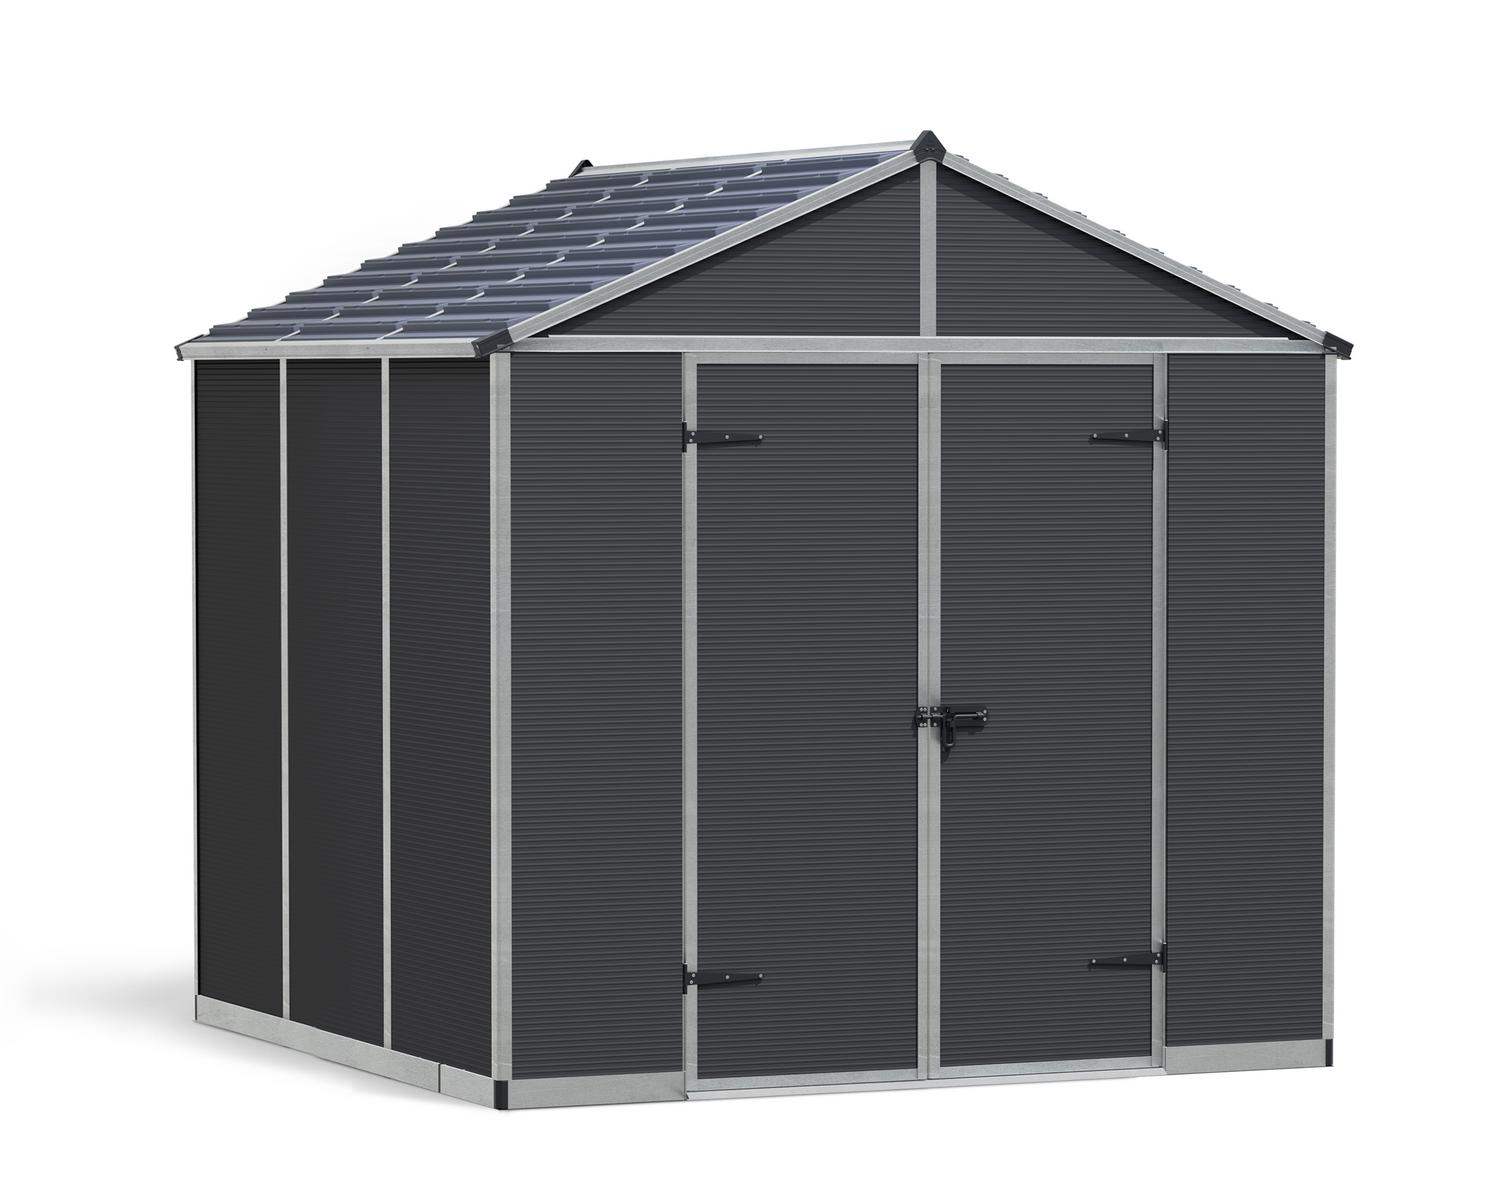 Canopia by Palram Rubicon 8 ft. x 8 ft. Shed With Floor - Dark Grey Panels